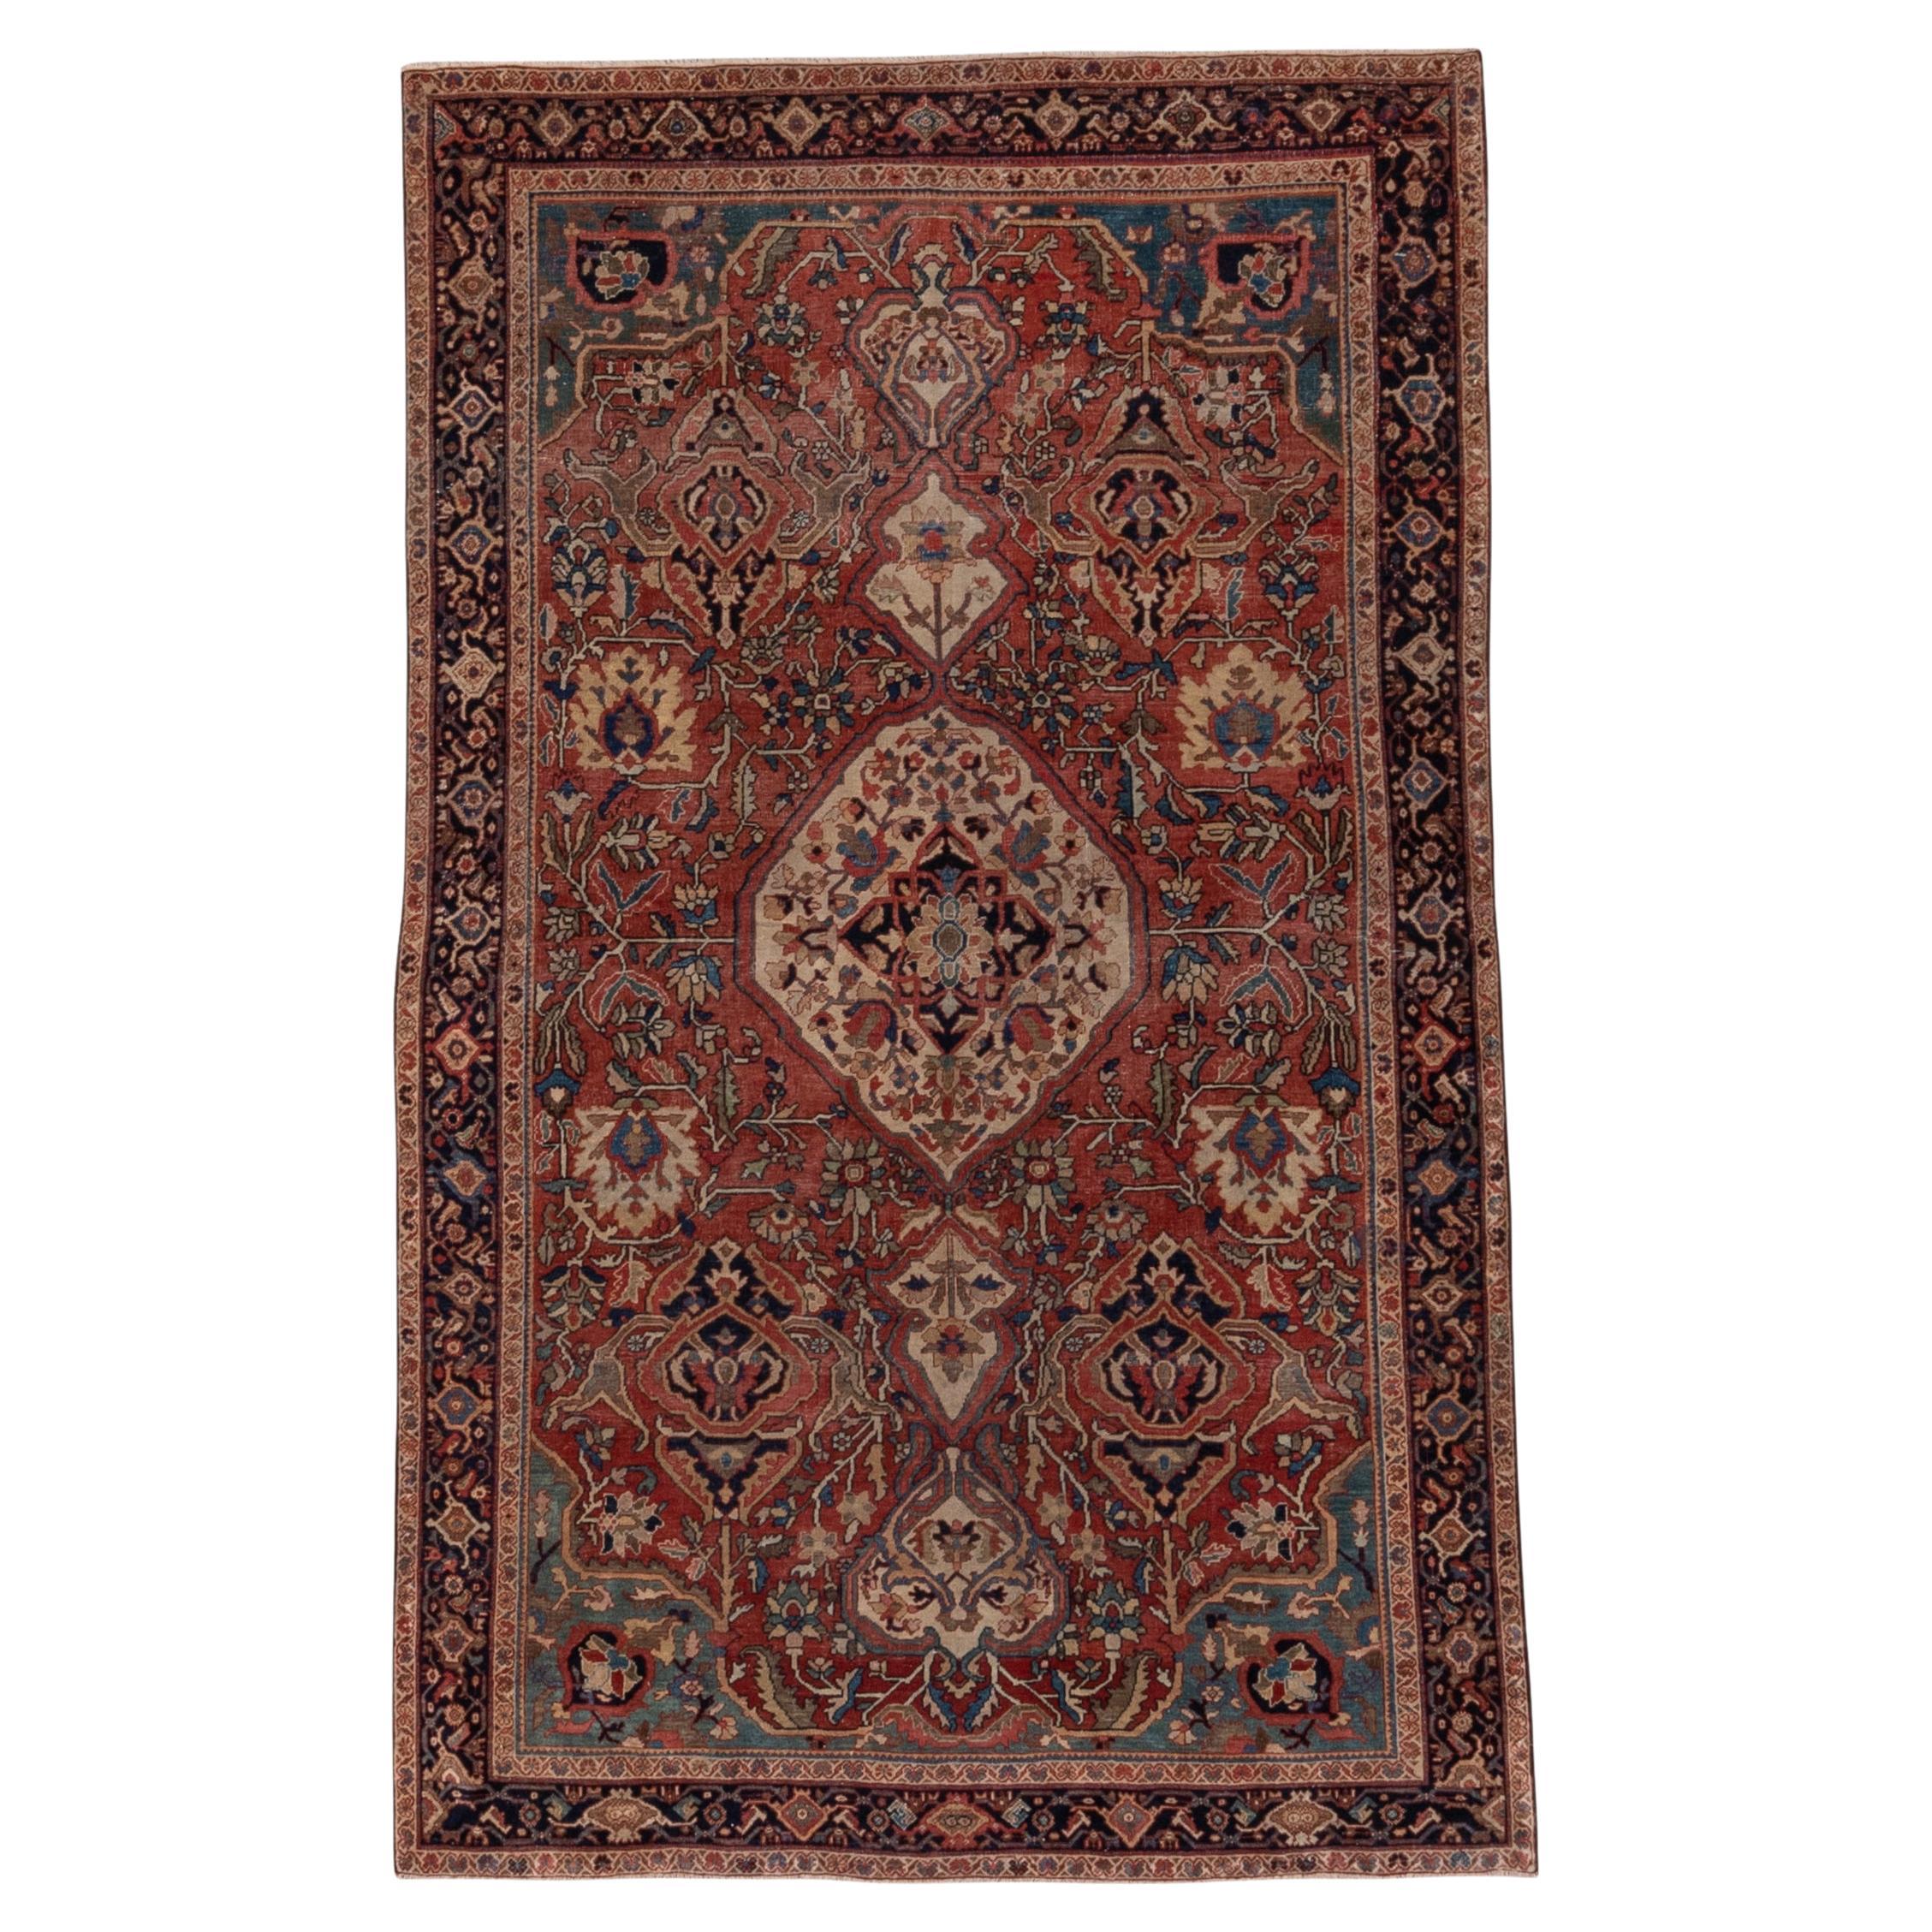 1900s Fine Antique Persian Farahan Sarouk Rug, Soft Red Field & Blue Subfield